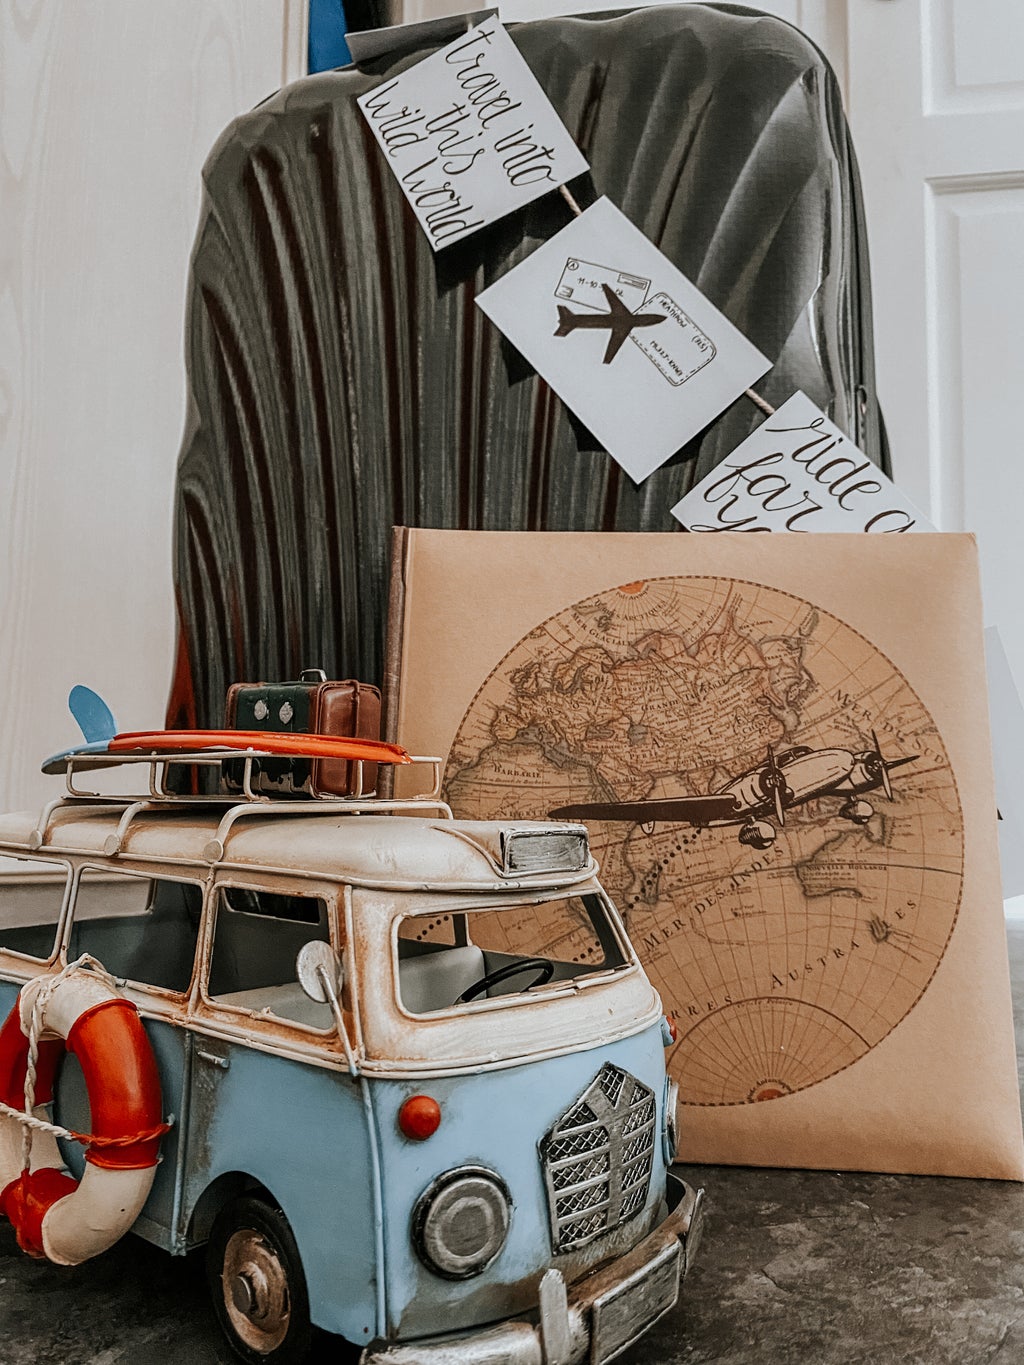 A suitcase with decoration about travel and a small van